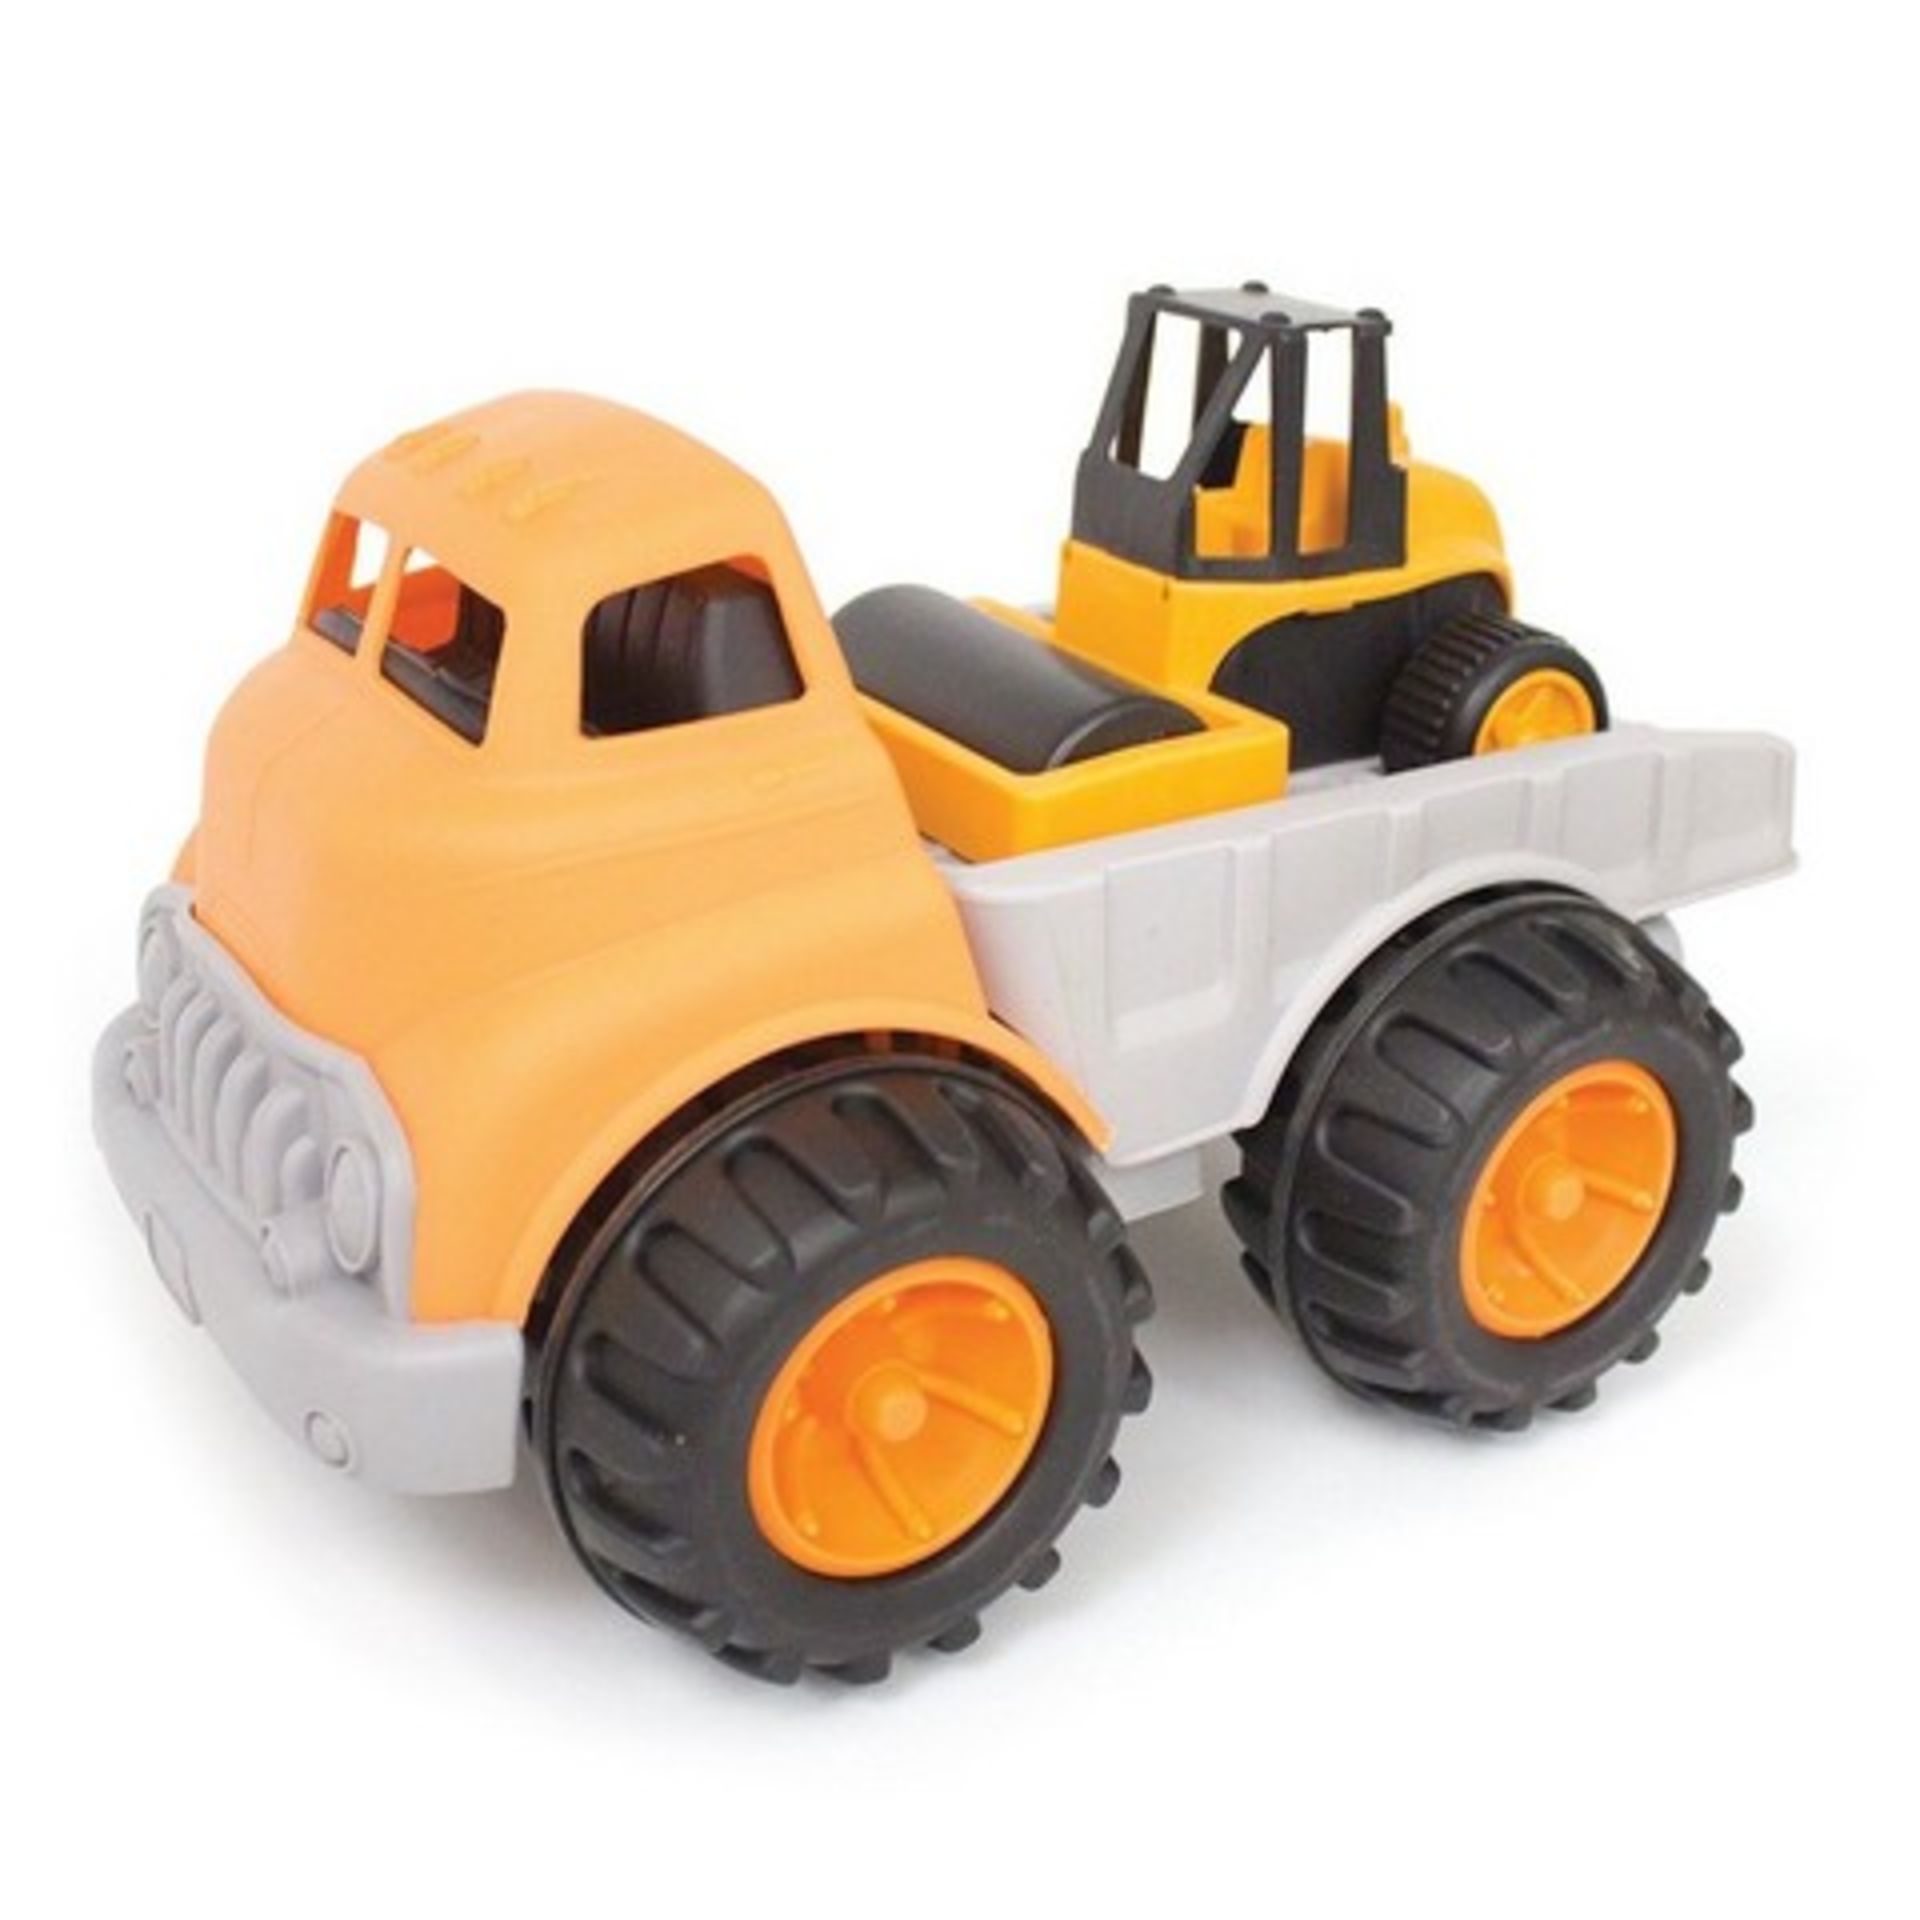 + VAT Brand New Big Play Truck Construction Engineering Brigade Vehicle Set - Ideal For Sandpit